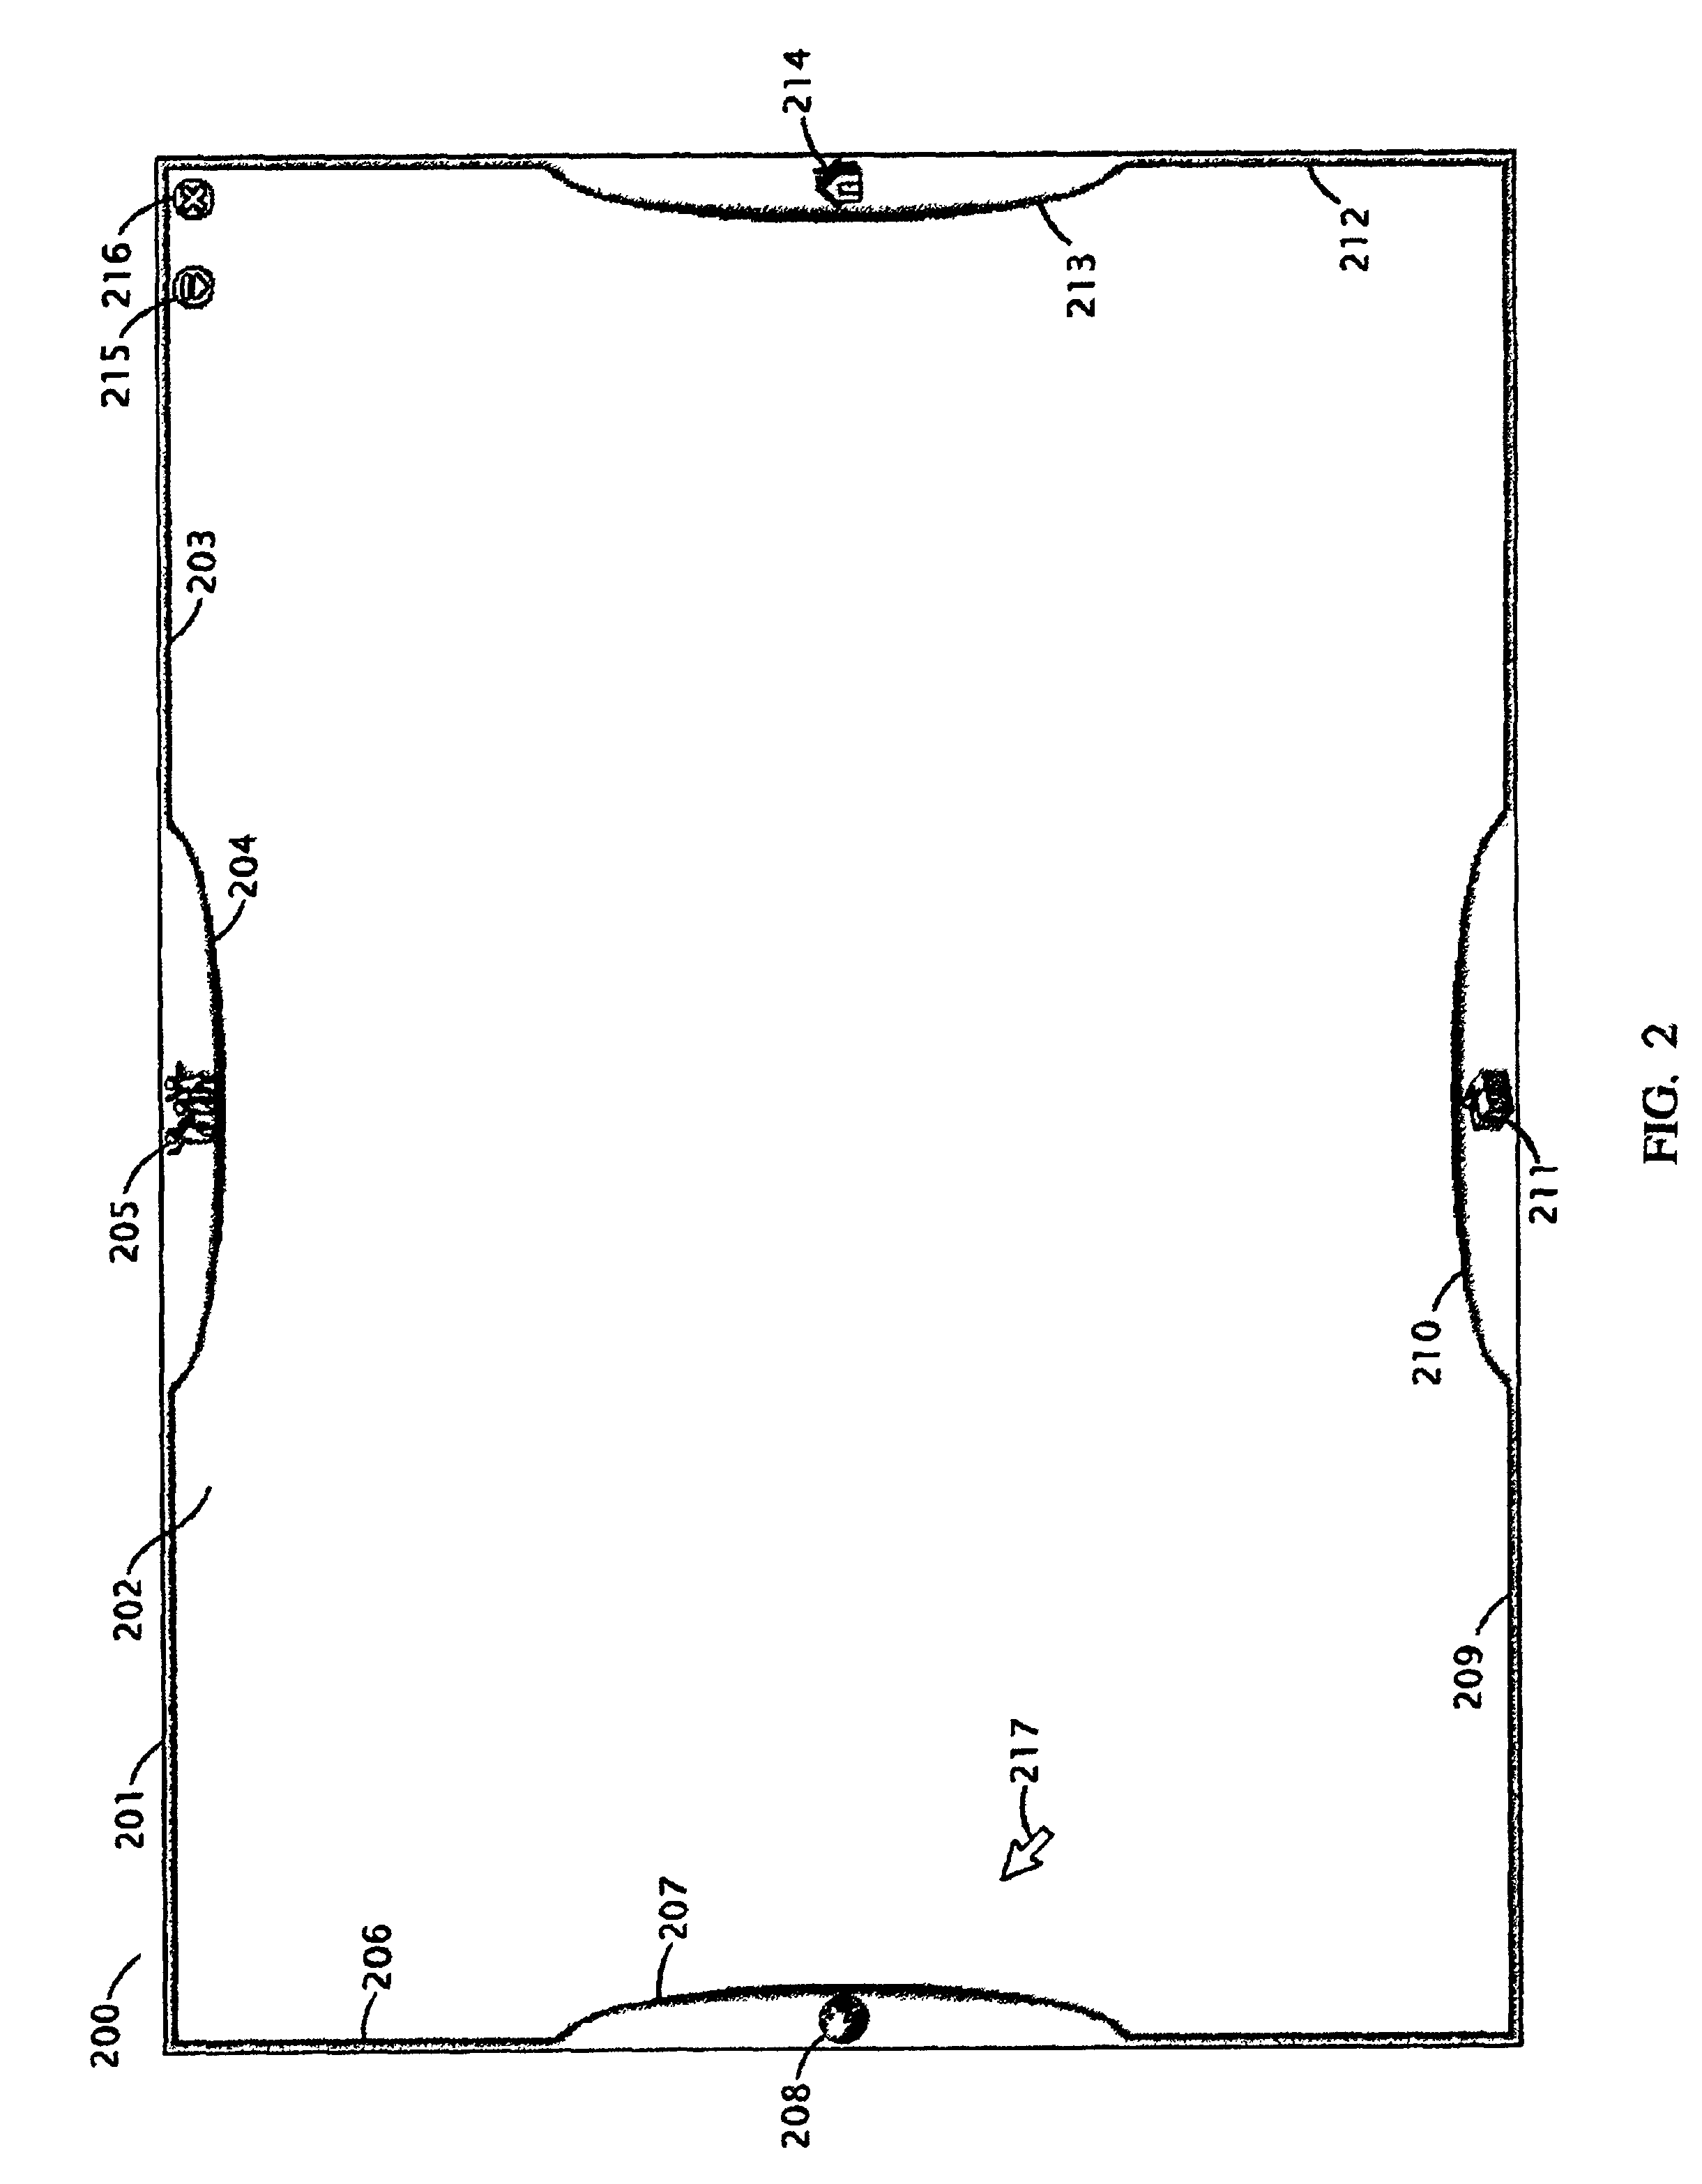 Method and apparatus for accessing information, computer programs and electronic communications across multiple computing devices using a graphical user interface